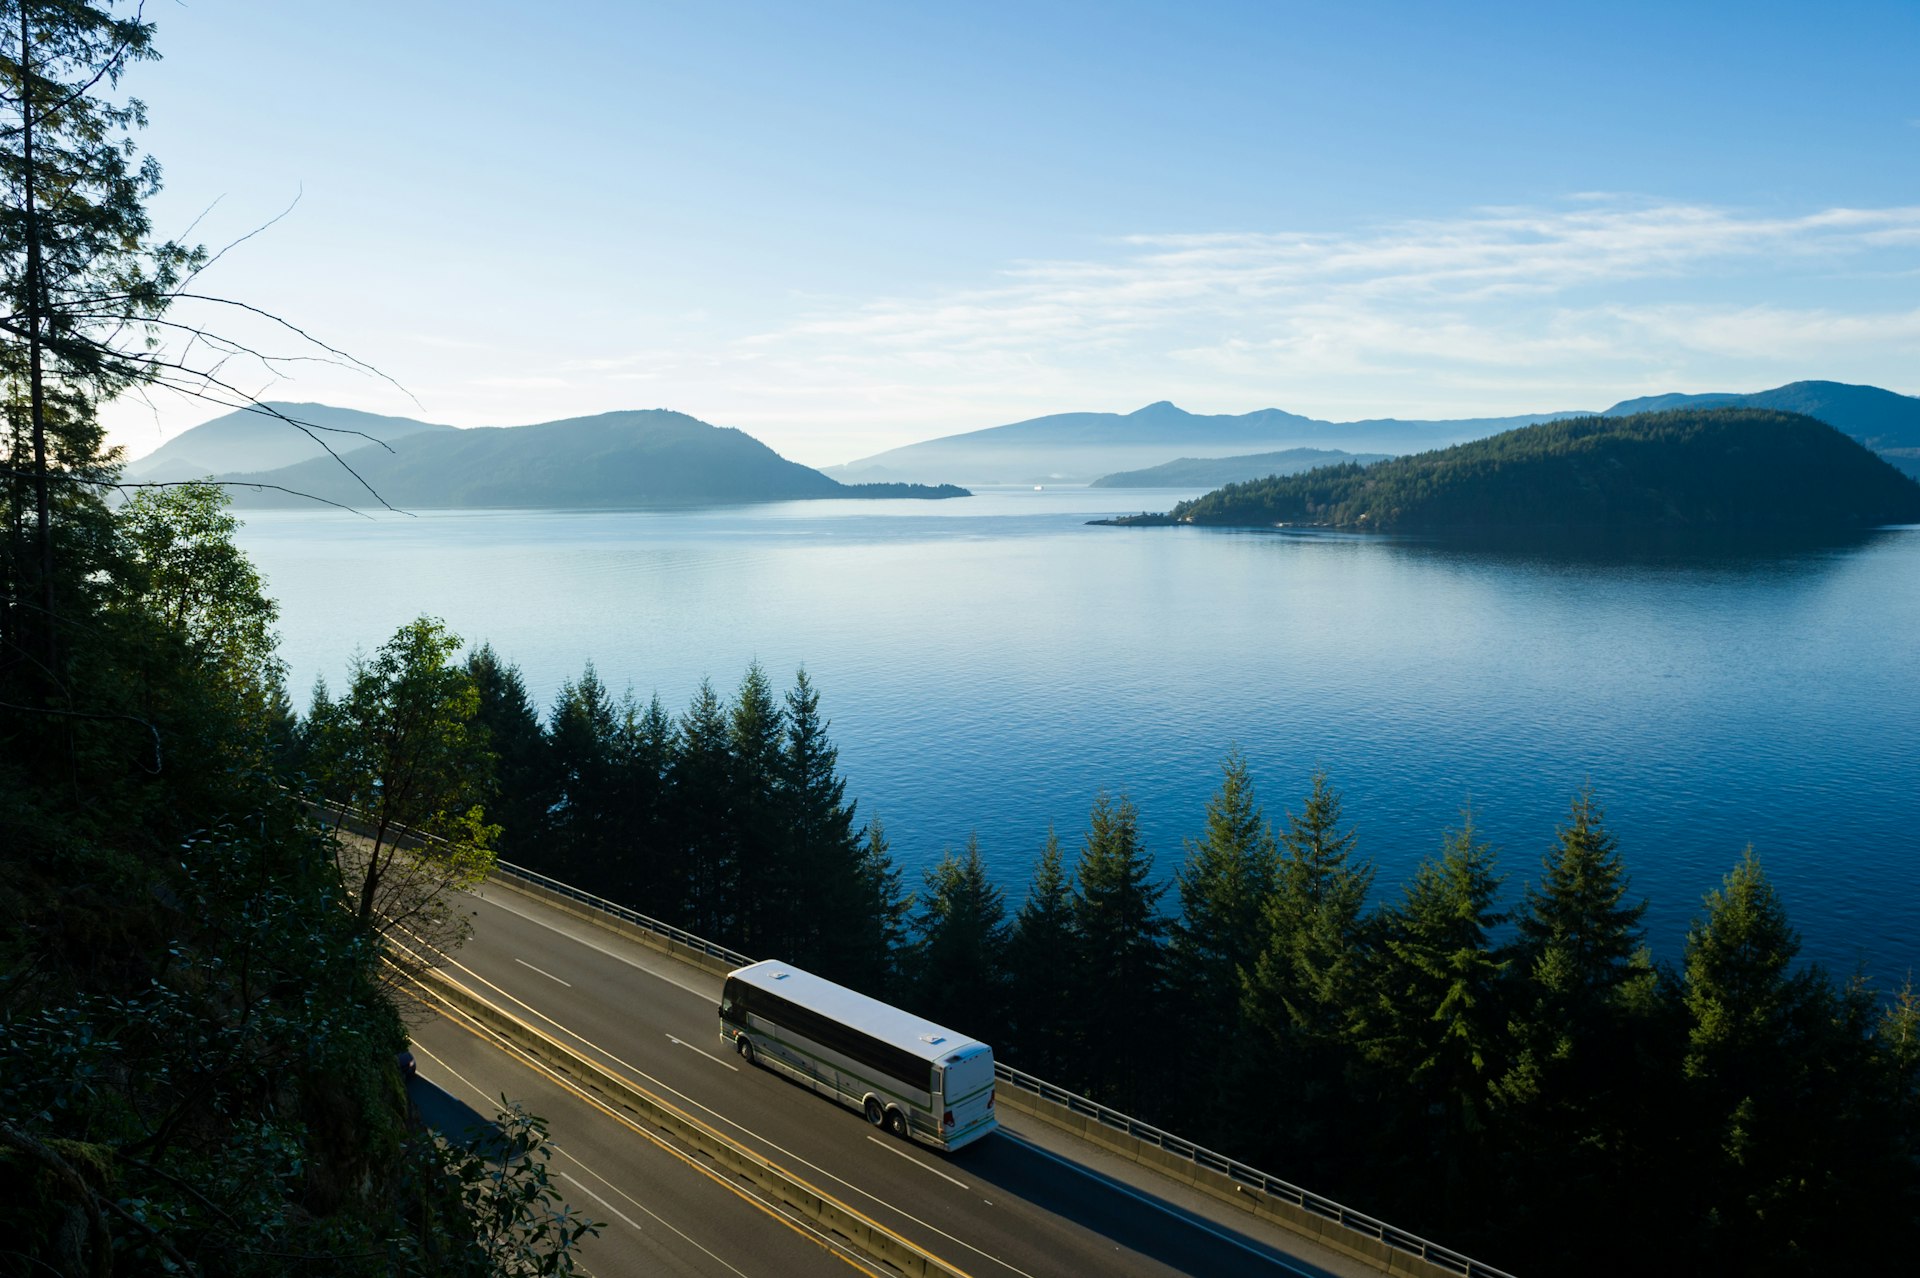 An aerials shot of a bus on the Sea to Sky Highway (Hwy 99) from Vancouver to Whistler, British Columbia, Canada